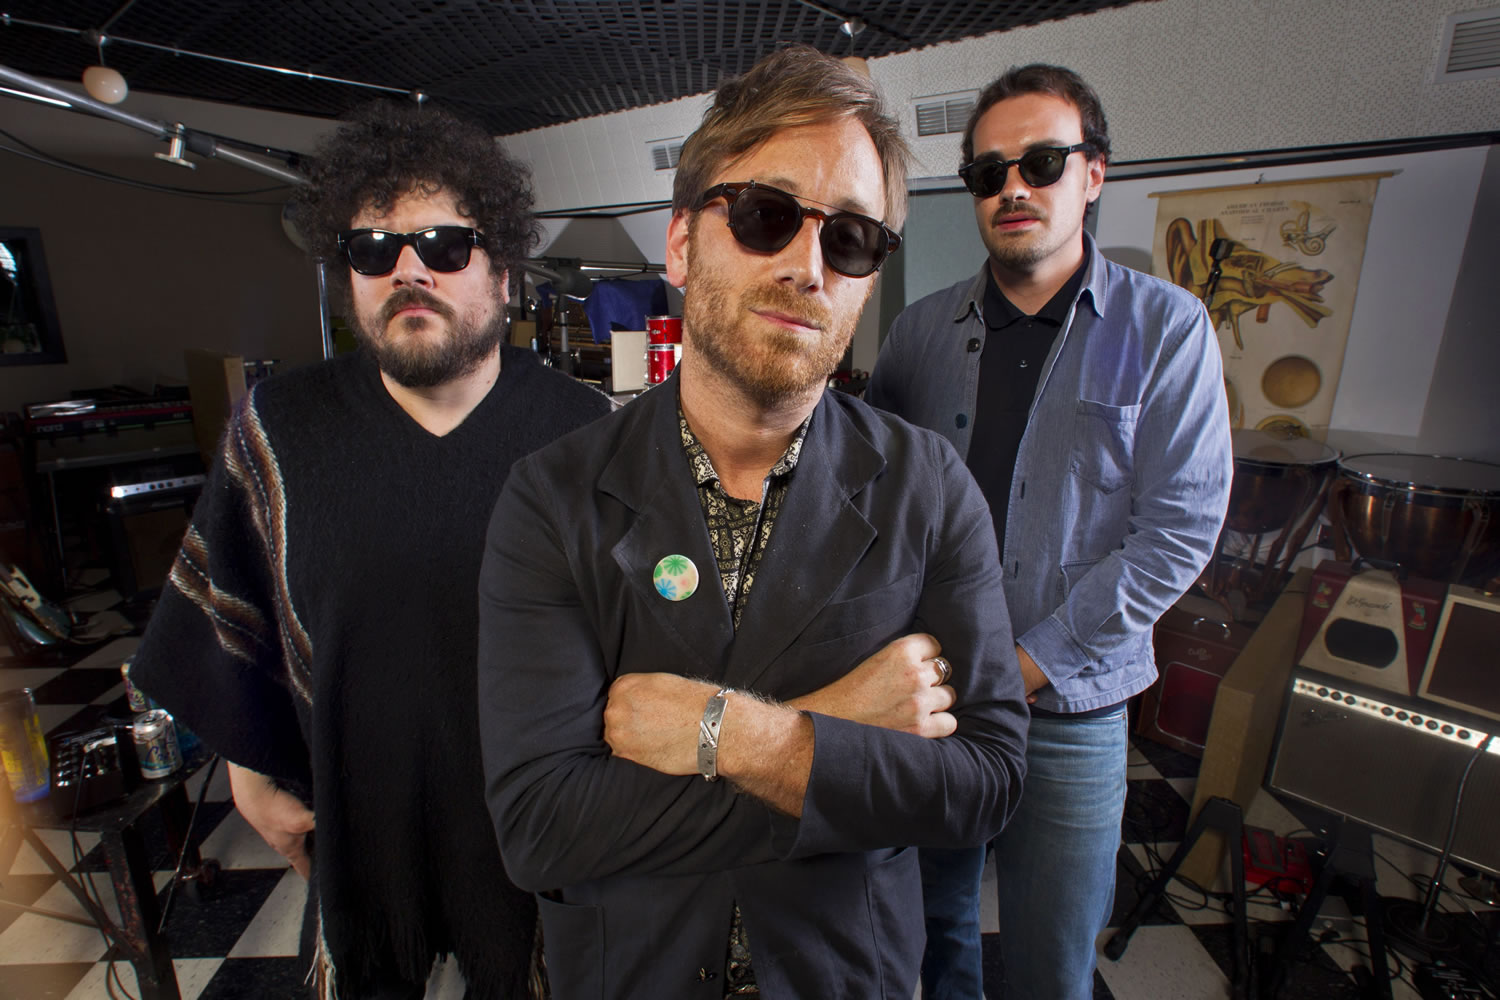 Dan Auerbach, center, Richard Swift, left, and Leon Michels pose Aug. 18 at Easy Eye Studio in Nashville, Tenn. Black Keys guitarist and singer Dan Auerbach brought together studio musicians with diverse backgrounds in rock, soul, Latin and country for his new band, The Arcs. Their debut album, "Yours, Dreamily"; out on Sept. 4, is a funky, synthesizer-heavy collection of garage rock songs as varied as the musicians involved.